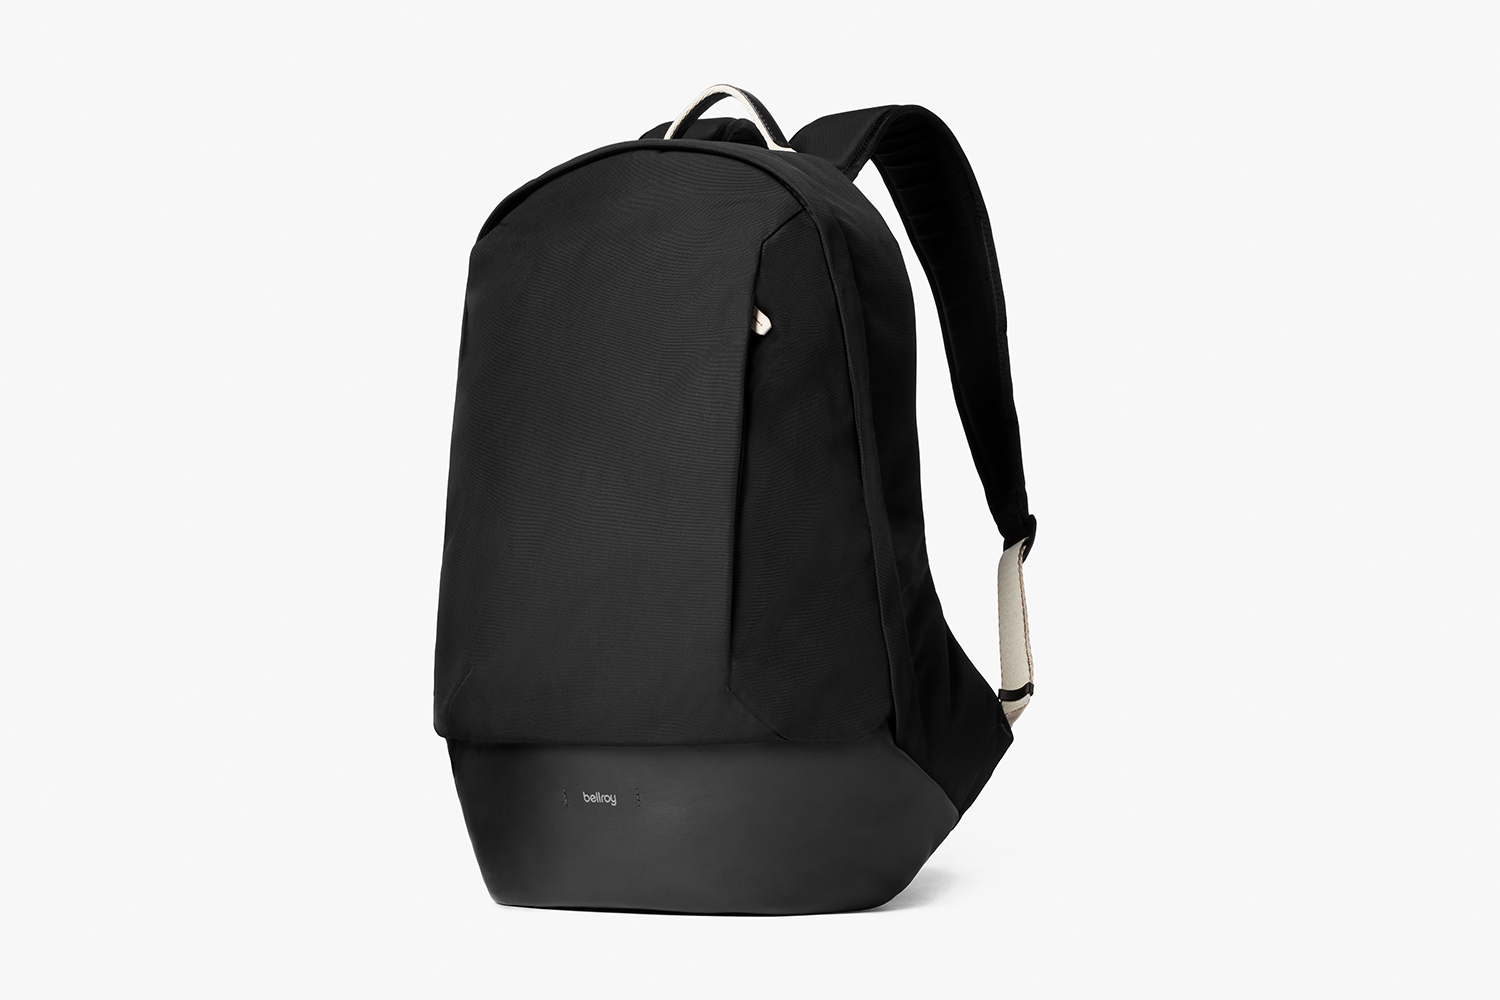 Bellroy Classic BackPack Premium Editionバッグパック/リュック ...